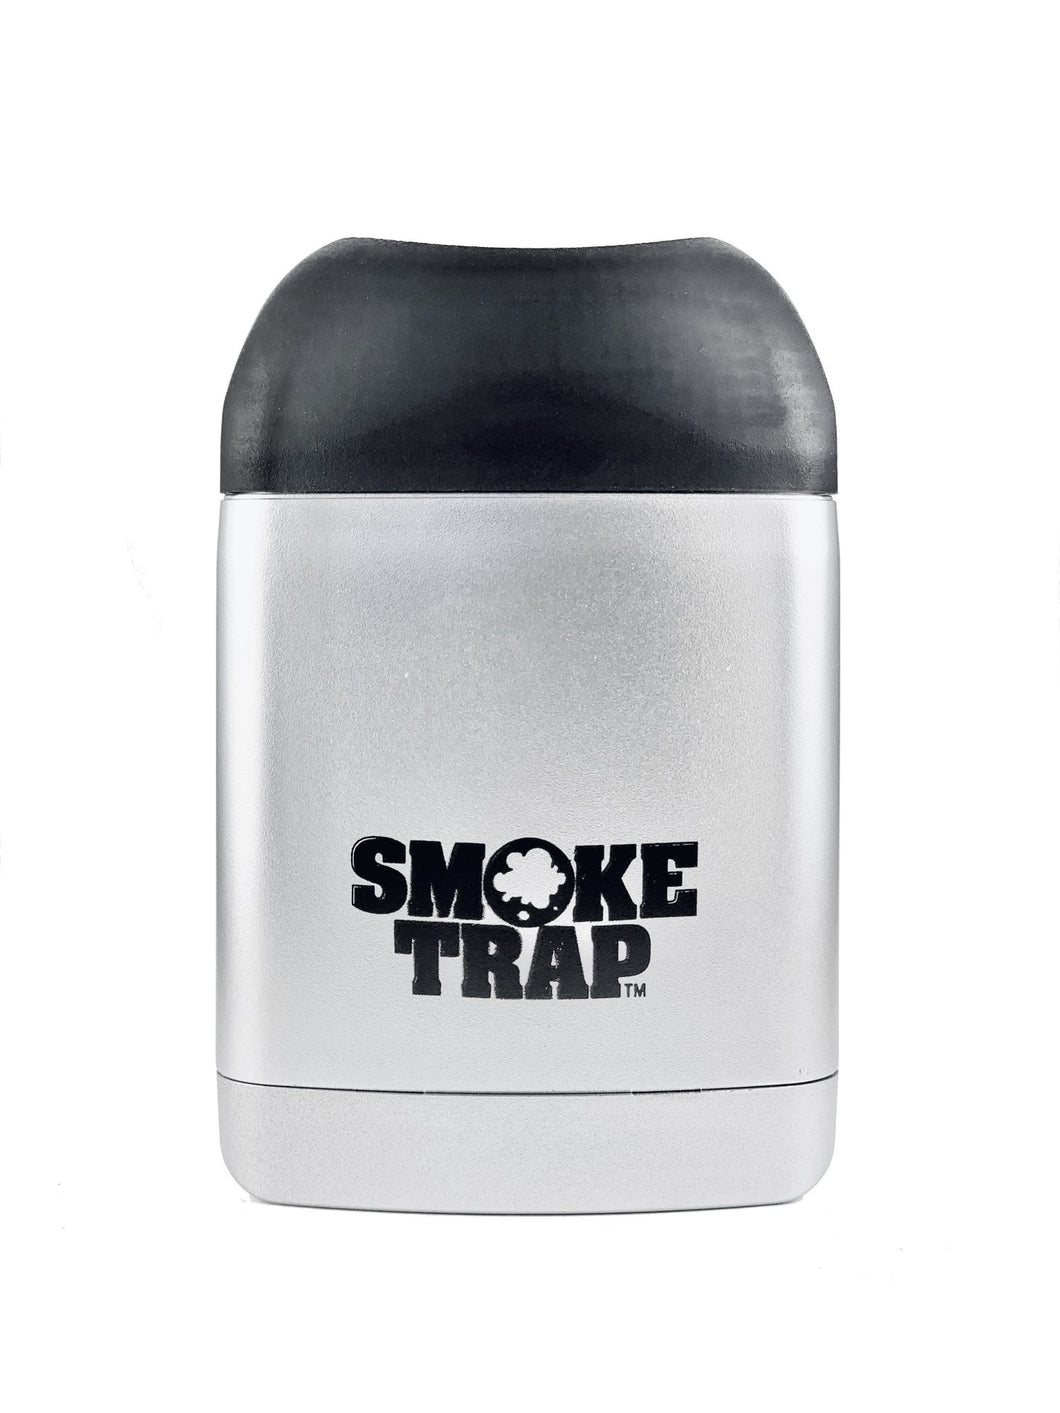 Puffing Poison Tank: A Secondhand Smoke Trap –